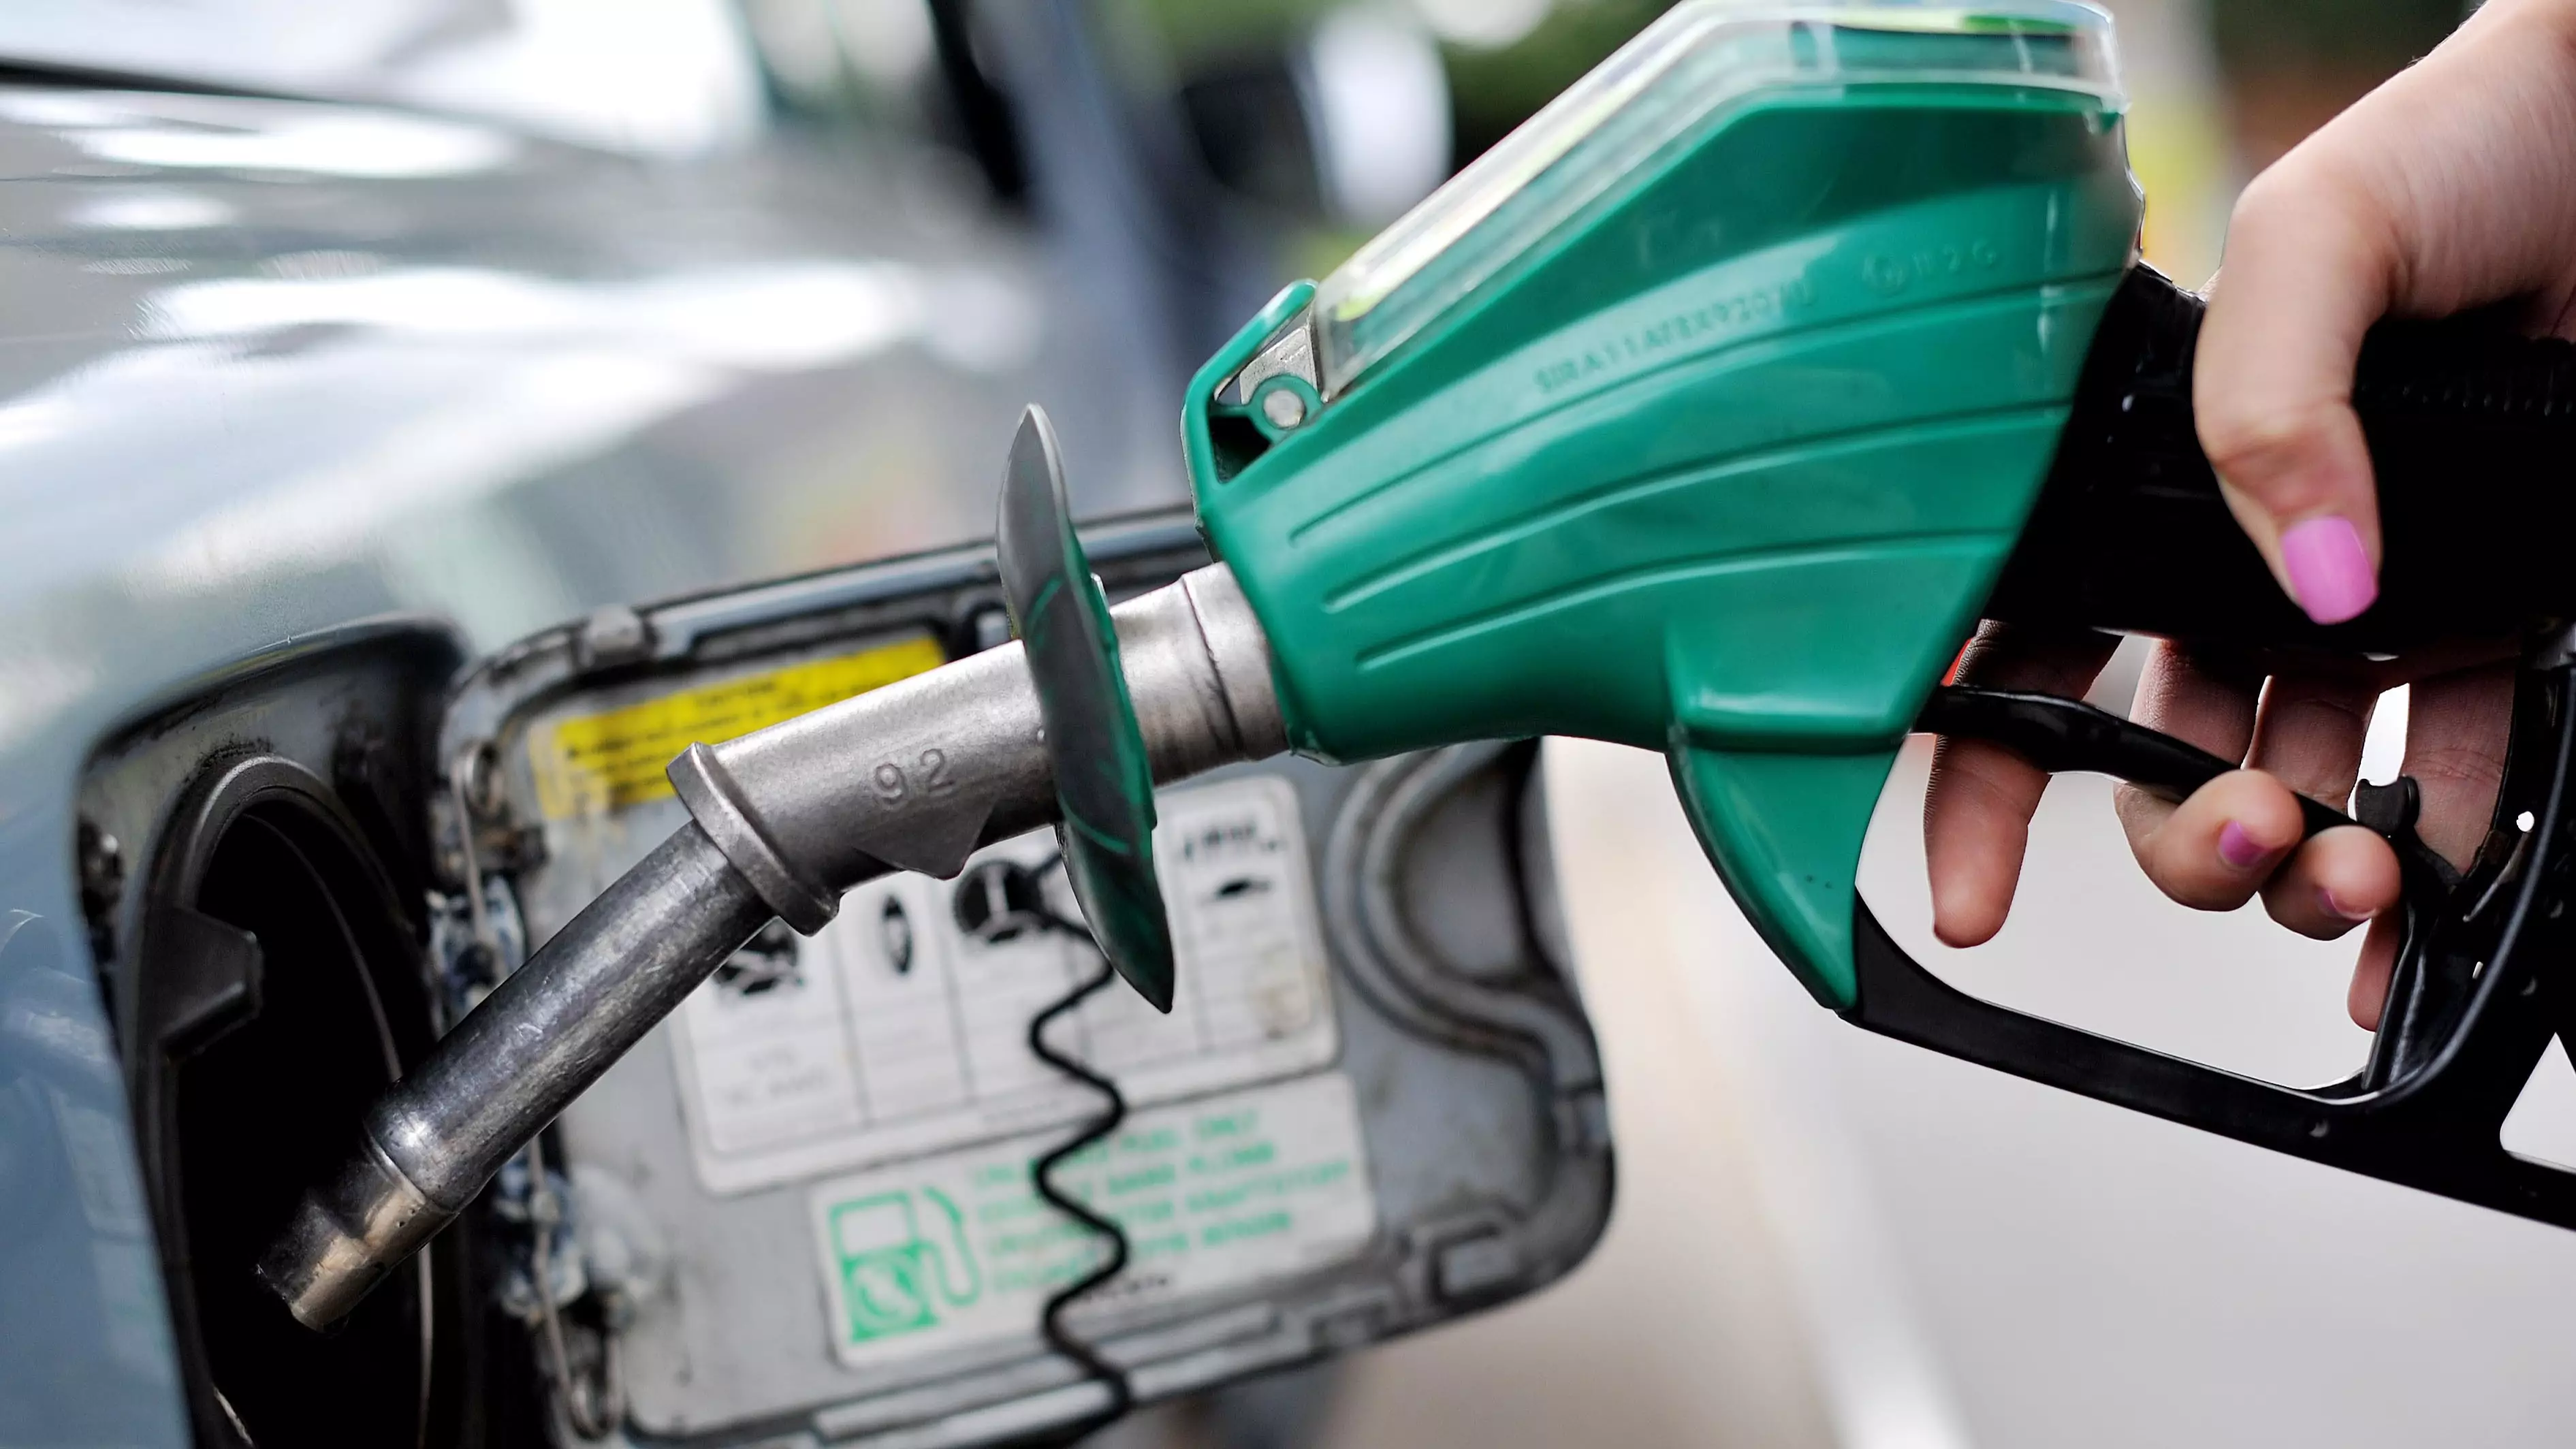 Petrol Falls By 'Largest Ever Amount' After UK Goes Into Lockdown